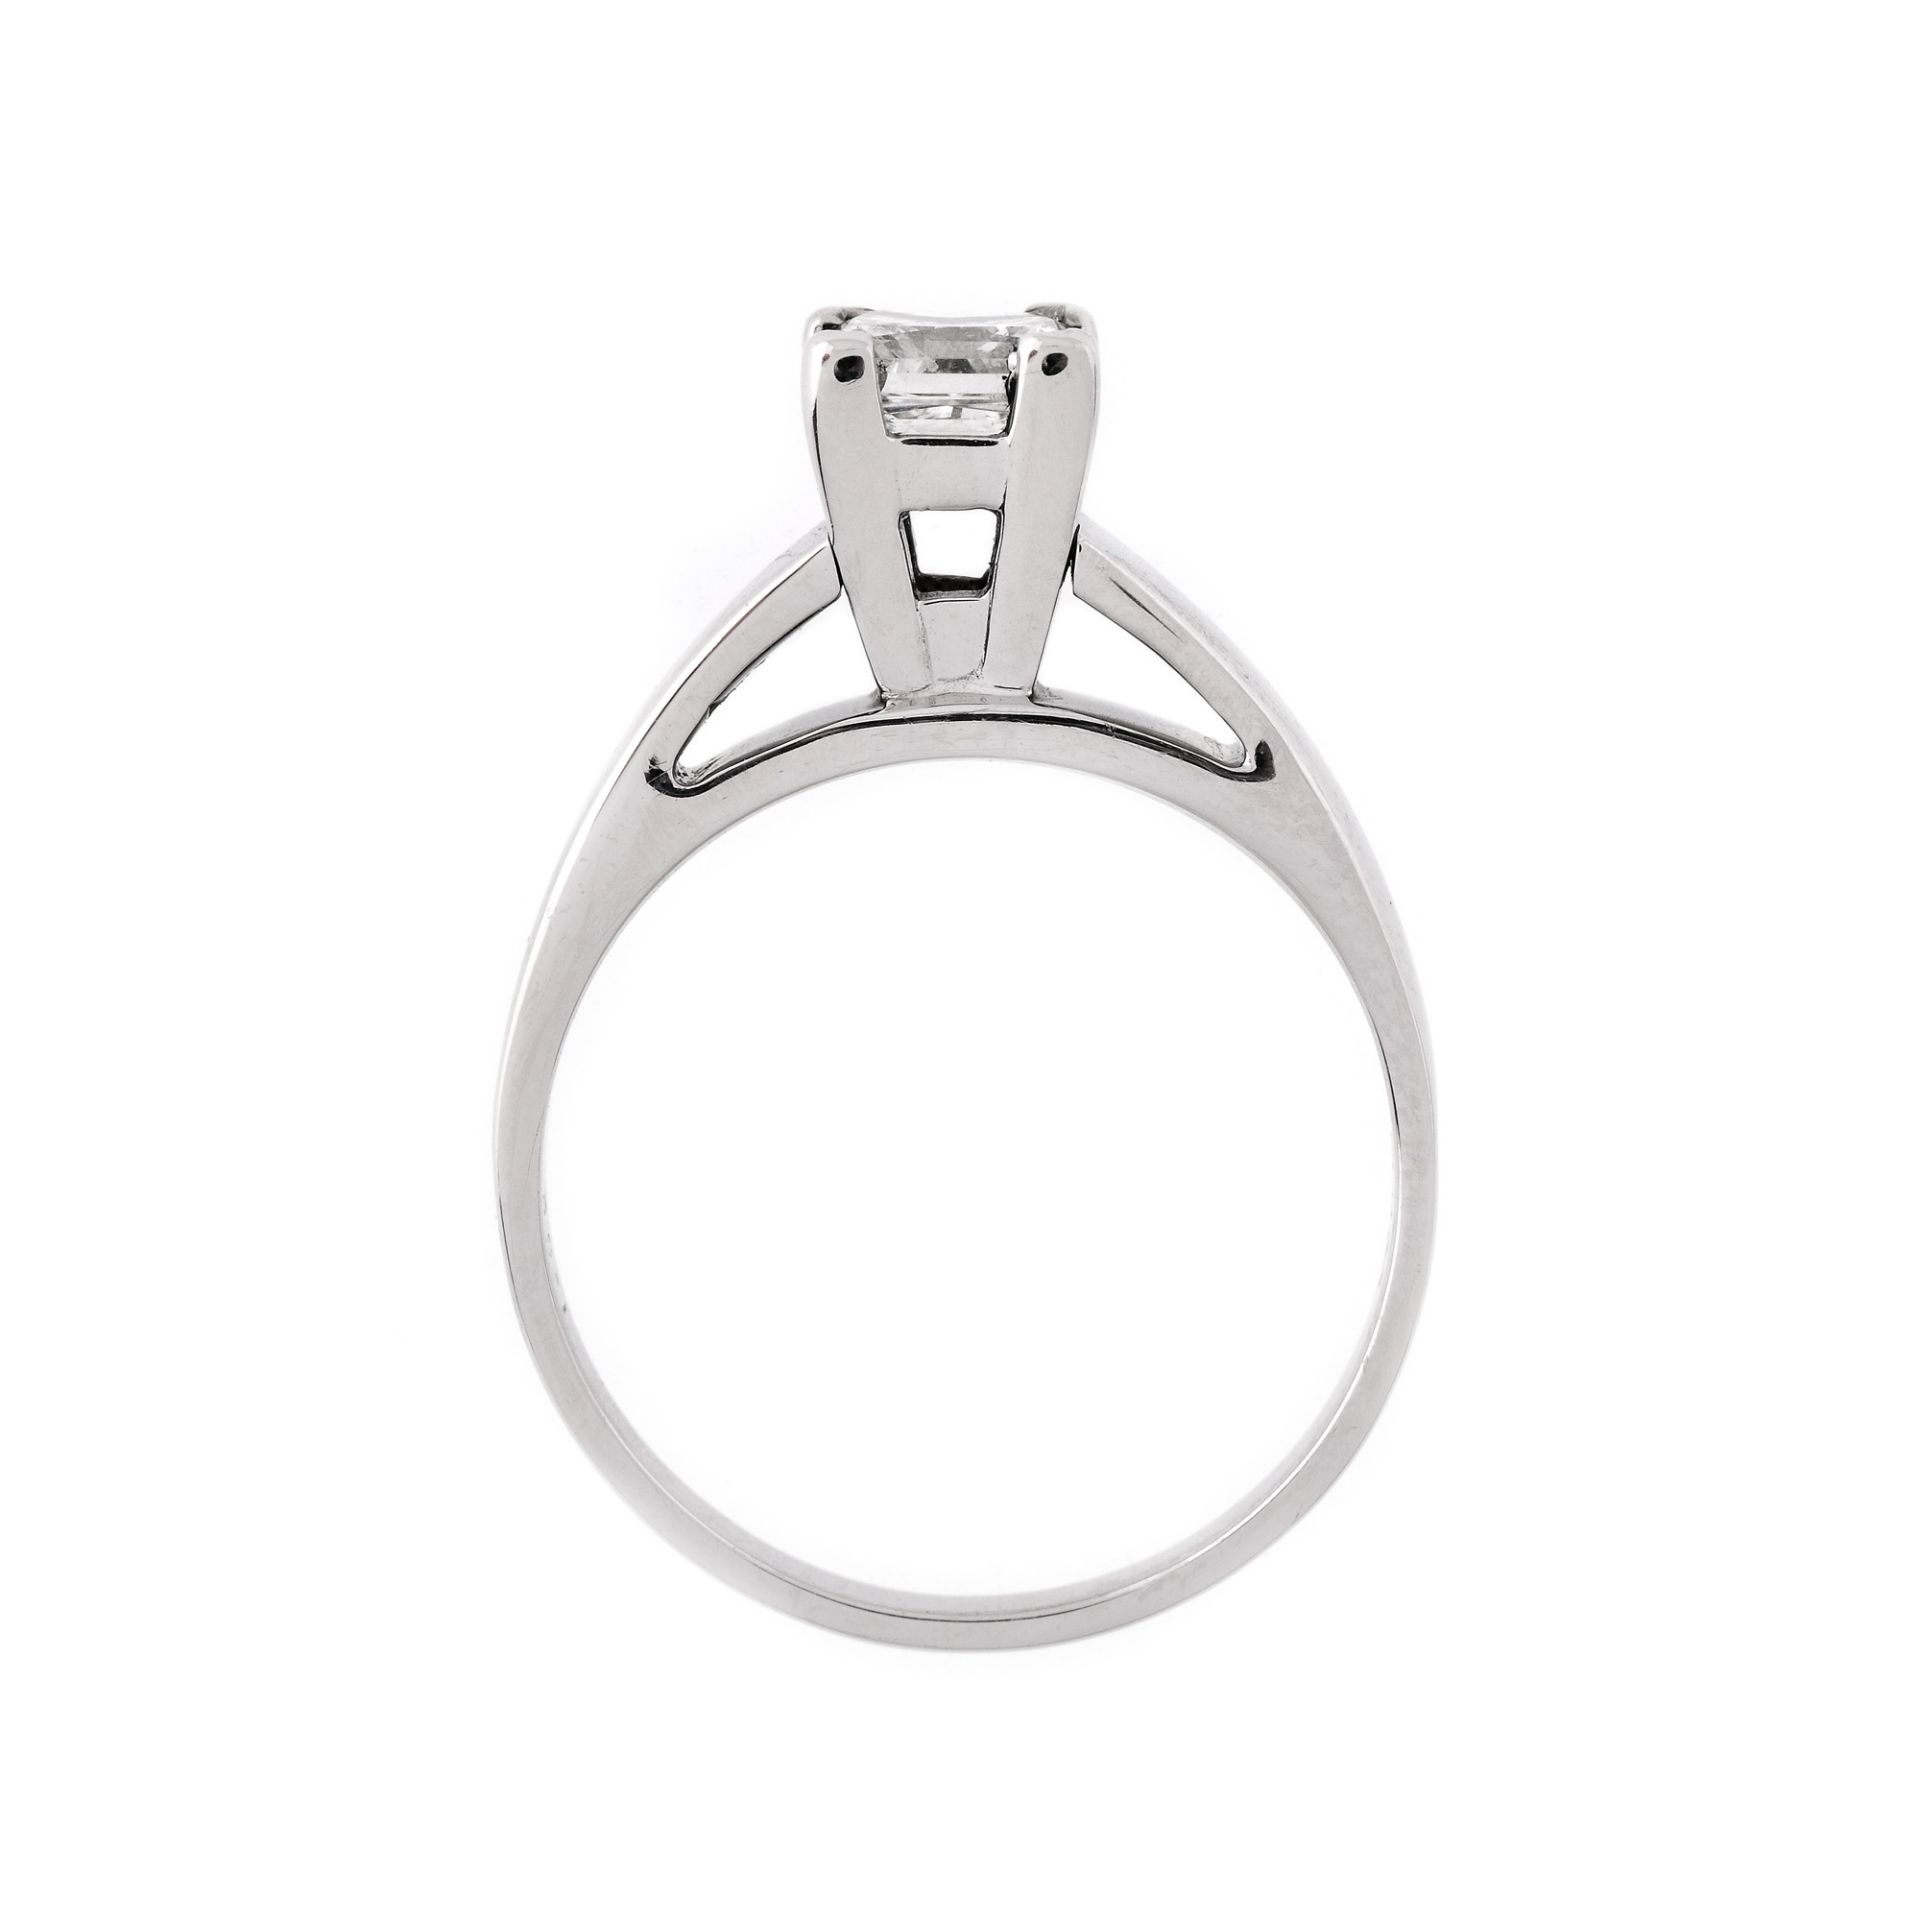 White gold ring, adorned with a solitaire diamond approx. 1.02 ct - Bild 3 aus 3